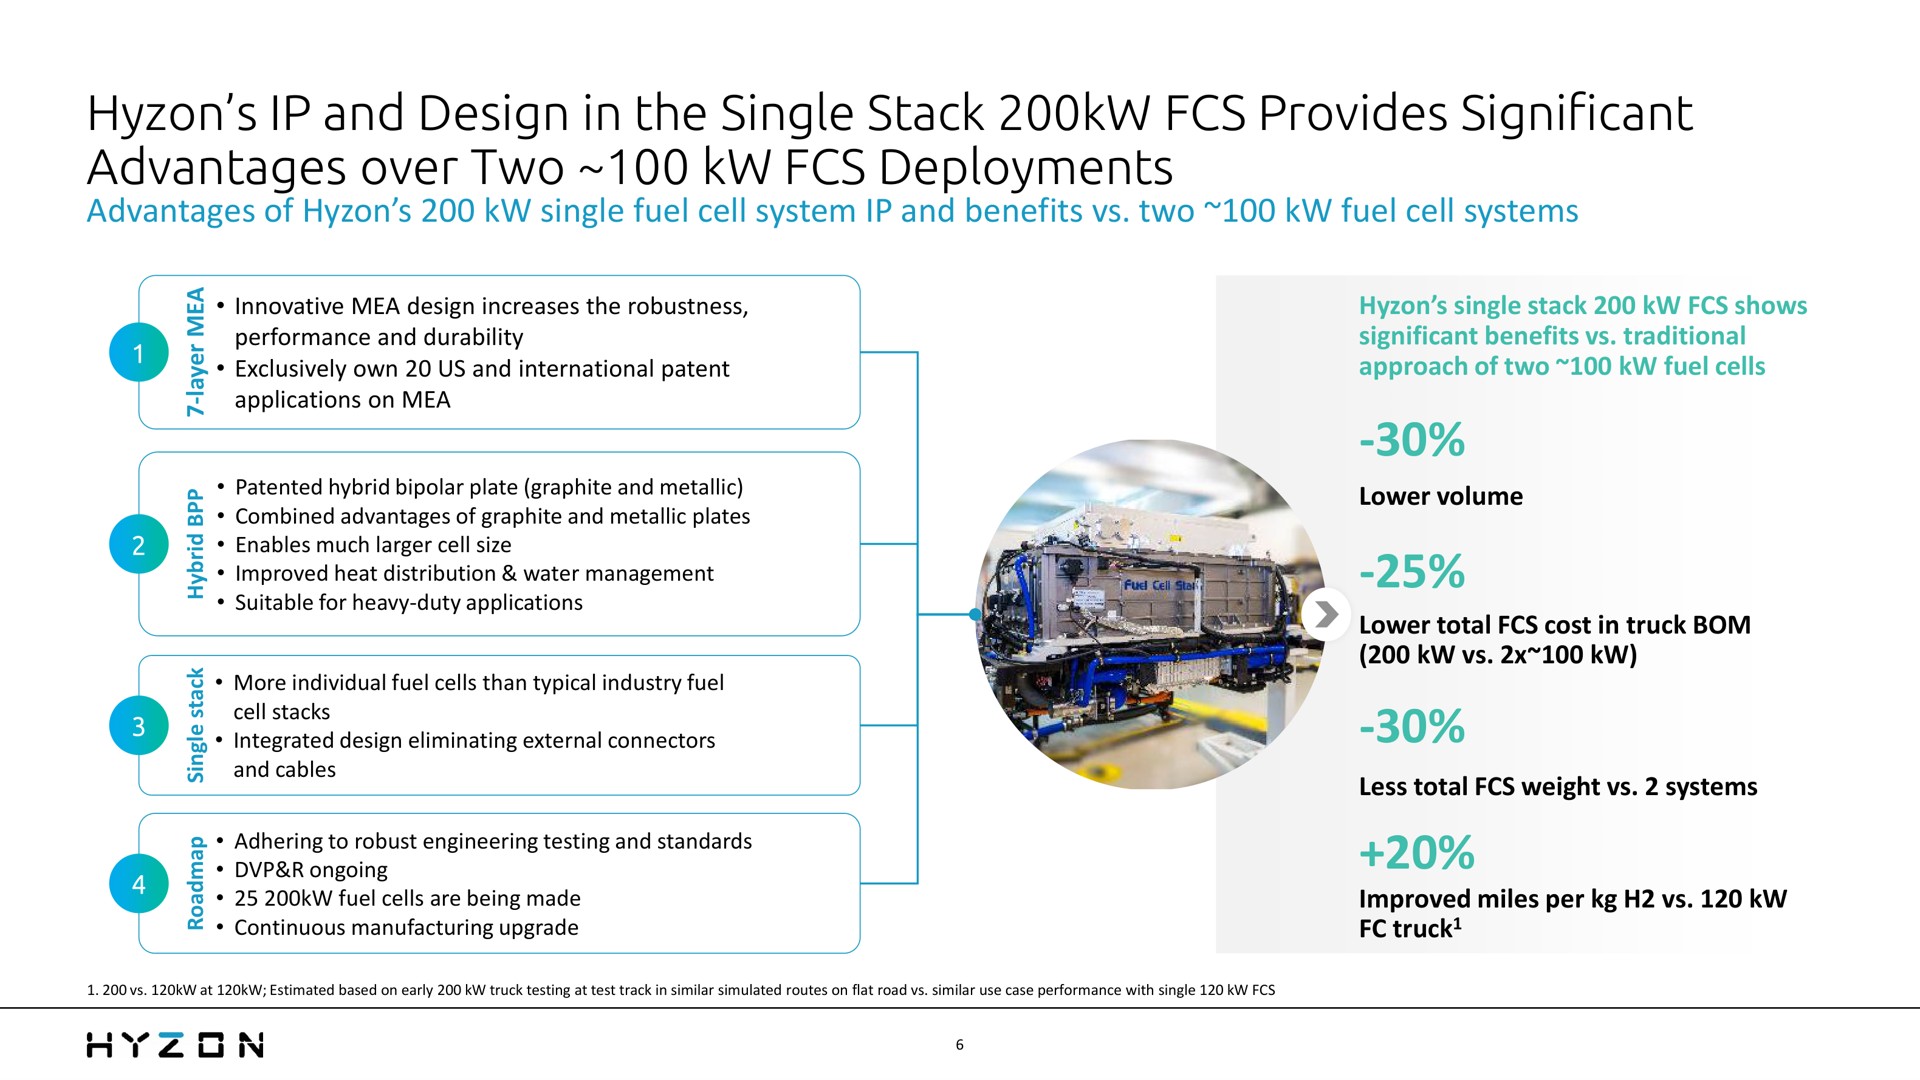 and design in the single stack provides significant advantages over two deployments | Hyzon